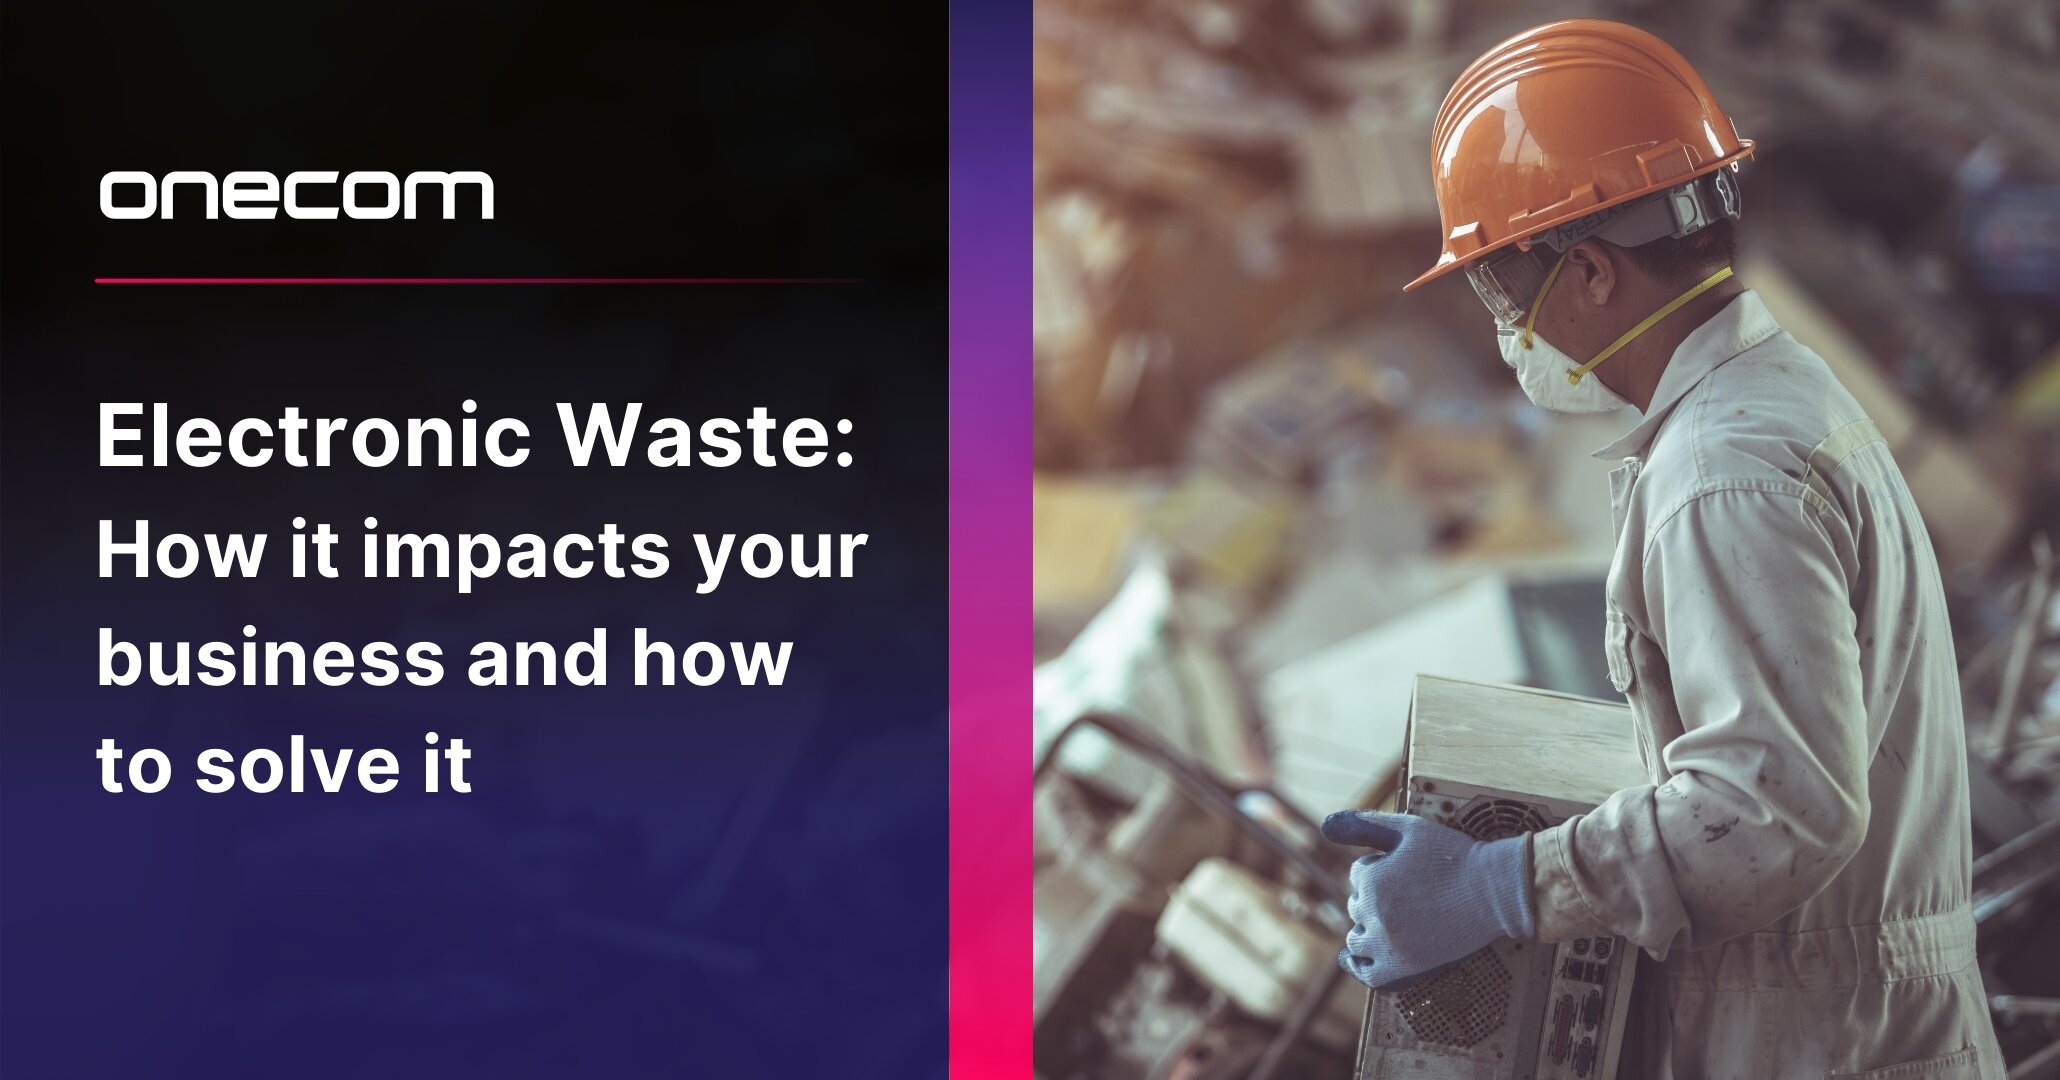 The Electronic Waste Problem: How it impacts your business and how to solve it